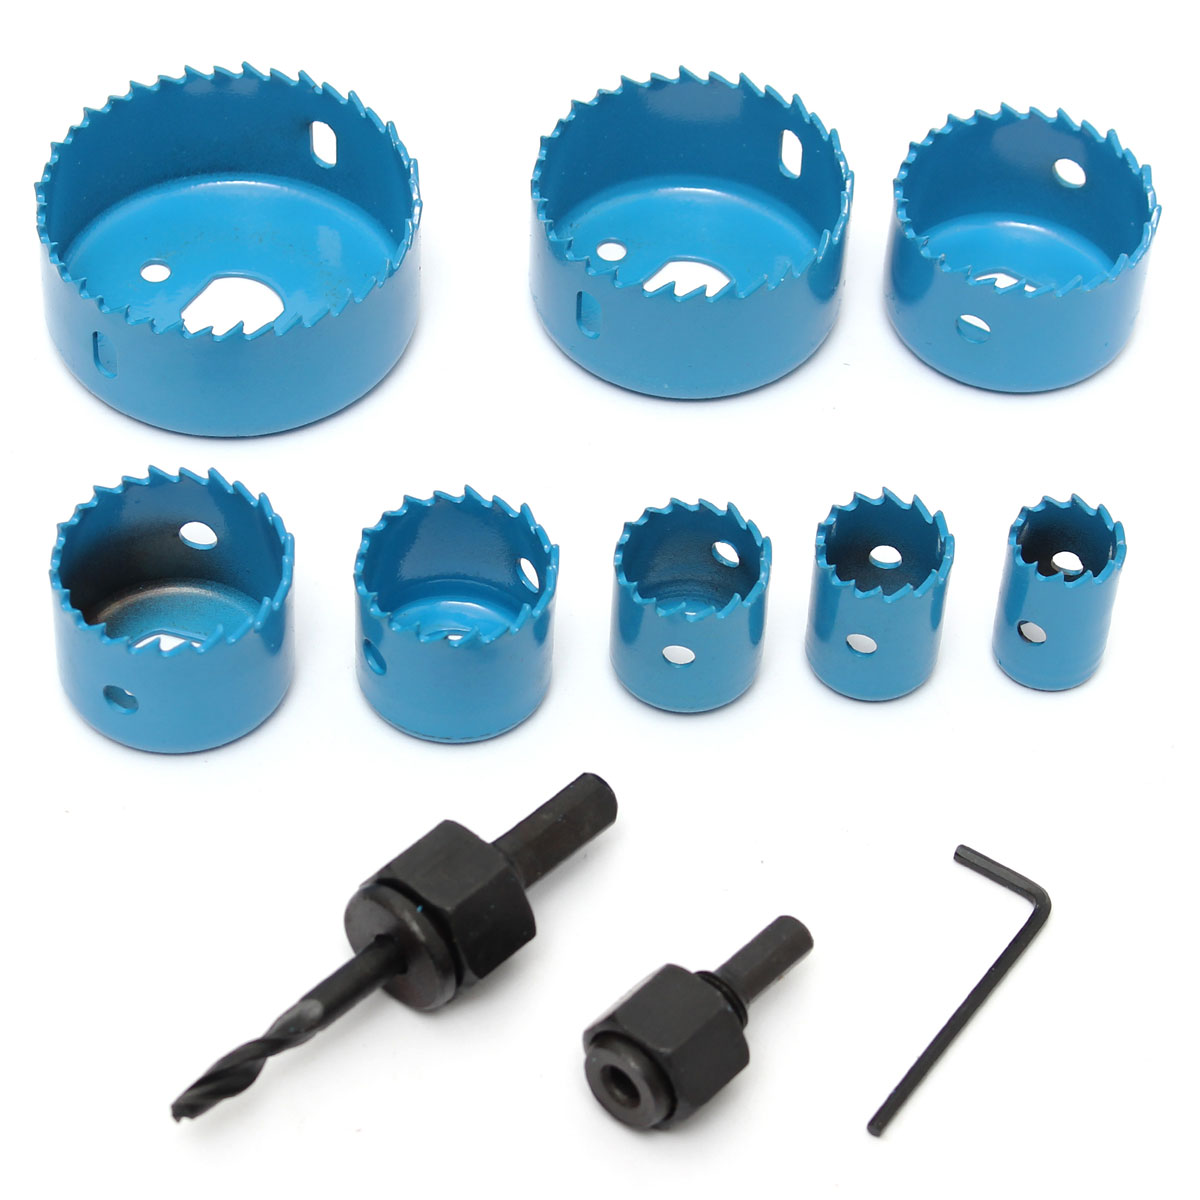 8pcs-Blue-Hole-Saw-Cutter-Set-with-Hex-Wrench-Wood-Alloy-Iron-Cutter-for-Woodworking-1554163-5